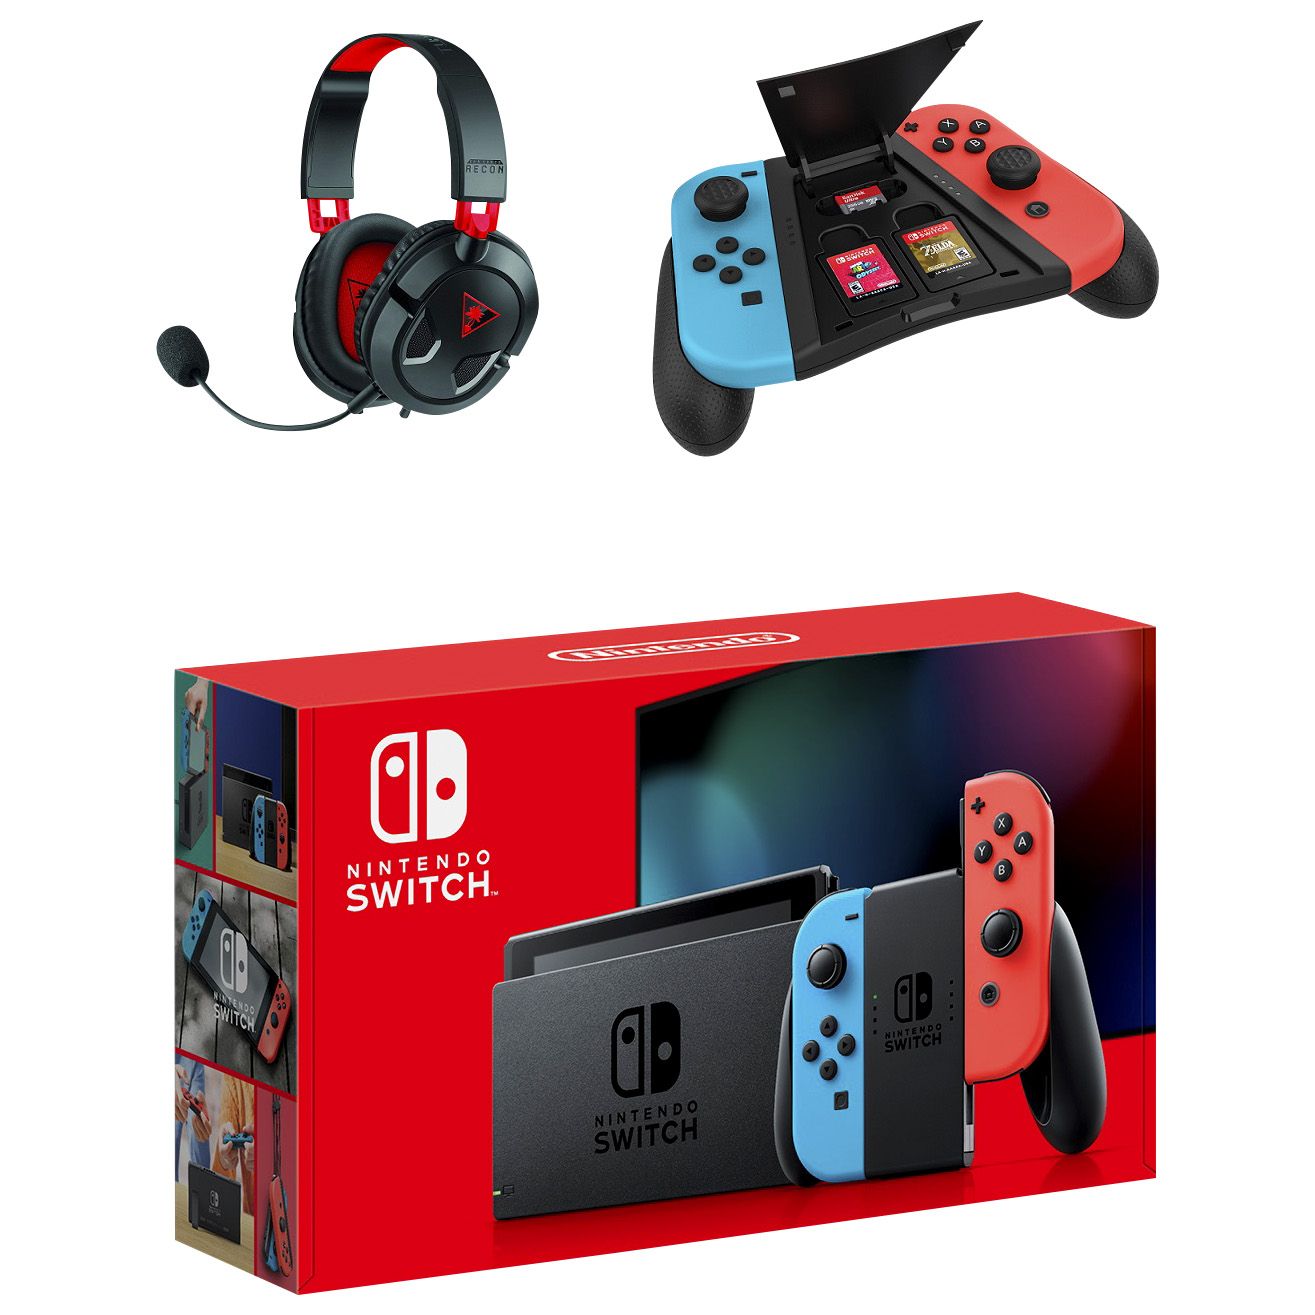 Nintendo Switch Console with Neon Blue and Neon Red Joy-Con Controllers